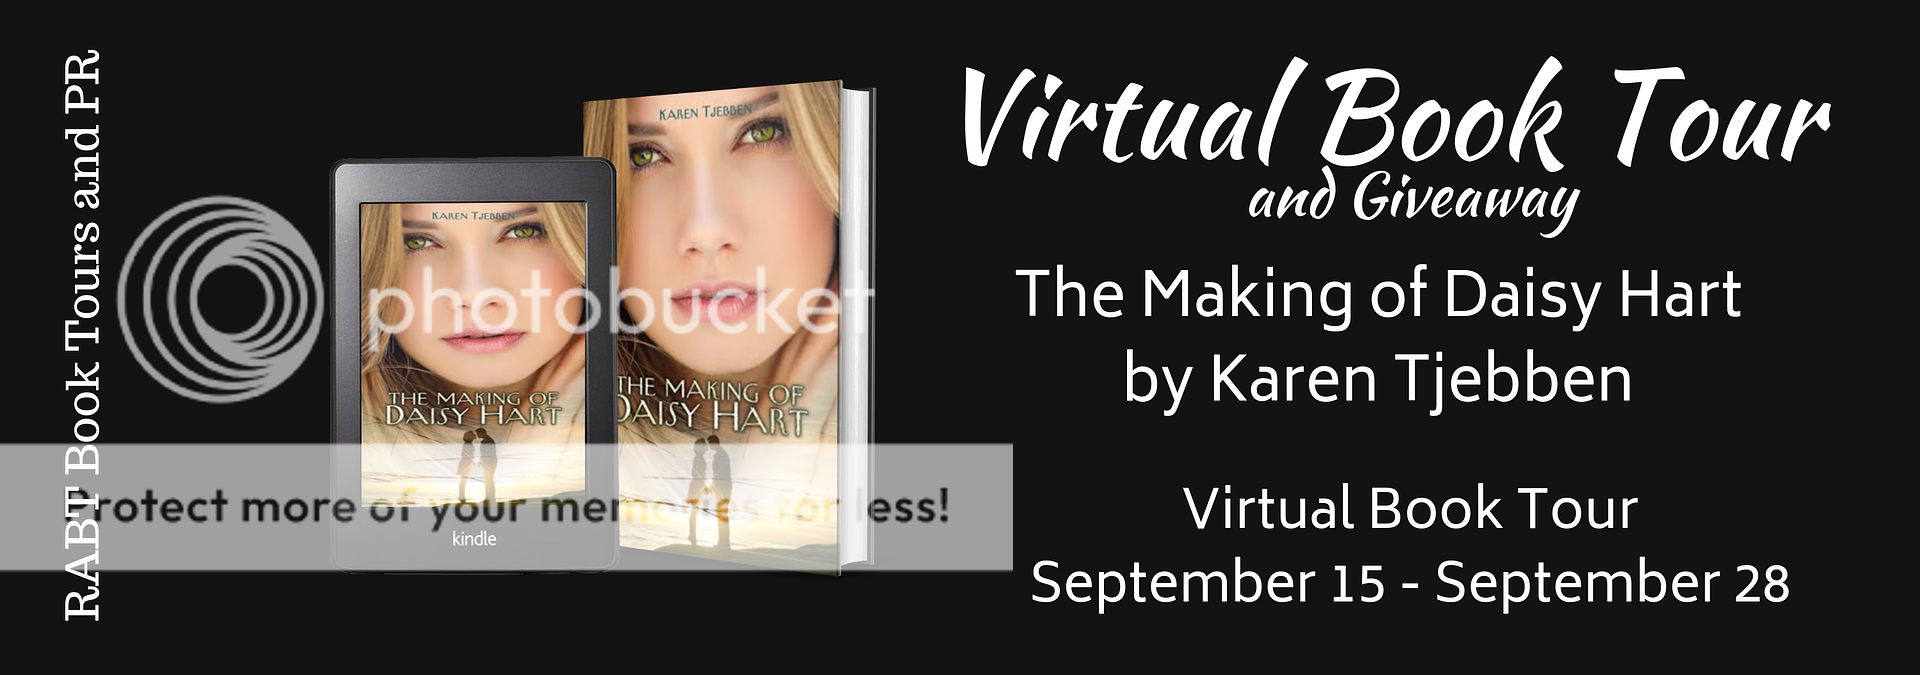 Virtual Book Tour: The Making of Daisy Hart by Karen Tjebben with my #review and a #giveaway for the #romance book @RABTBookTours @KTjebbenAuthor